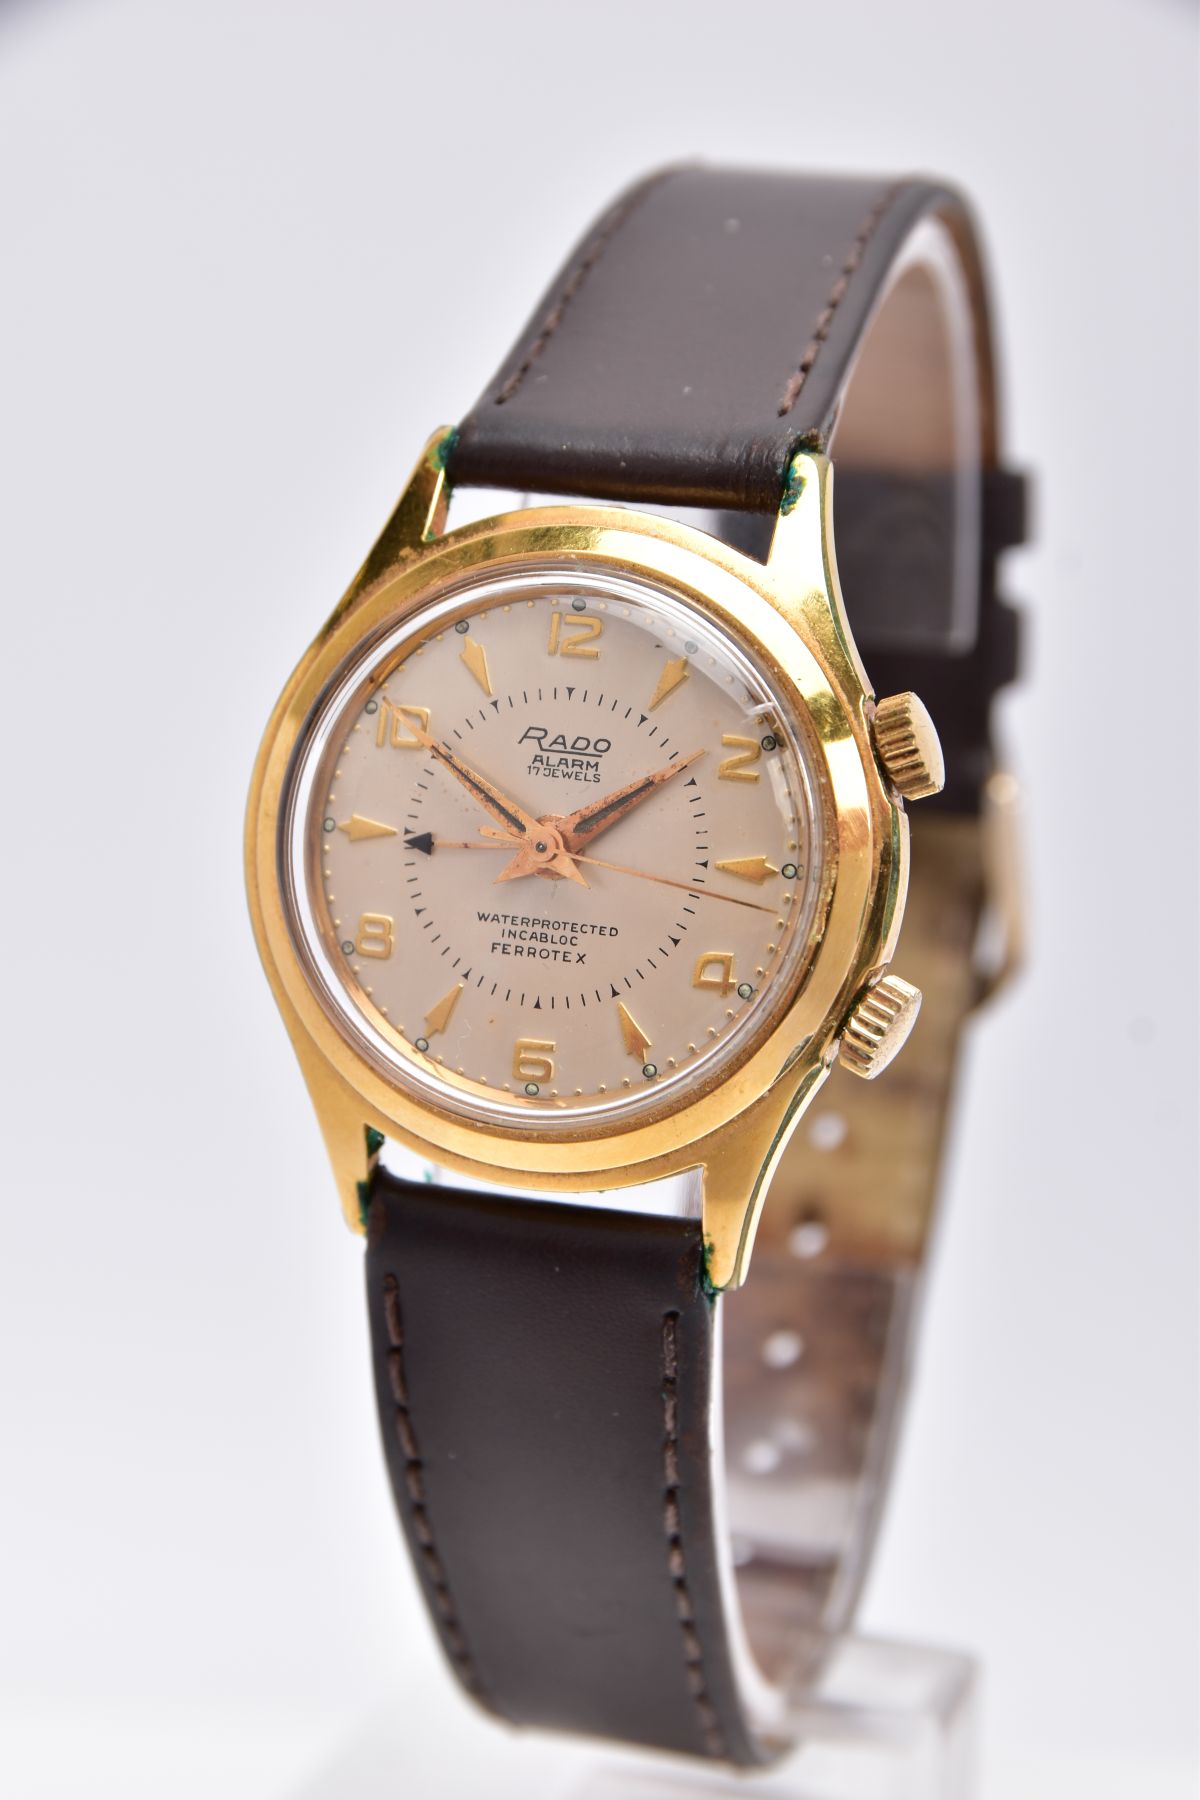 A GENT'S 'RADO' ALARM WRISTWATCH, hand wound movement, round champagne dial signed 'Radio Alarm, - Image 3 of 5